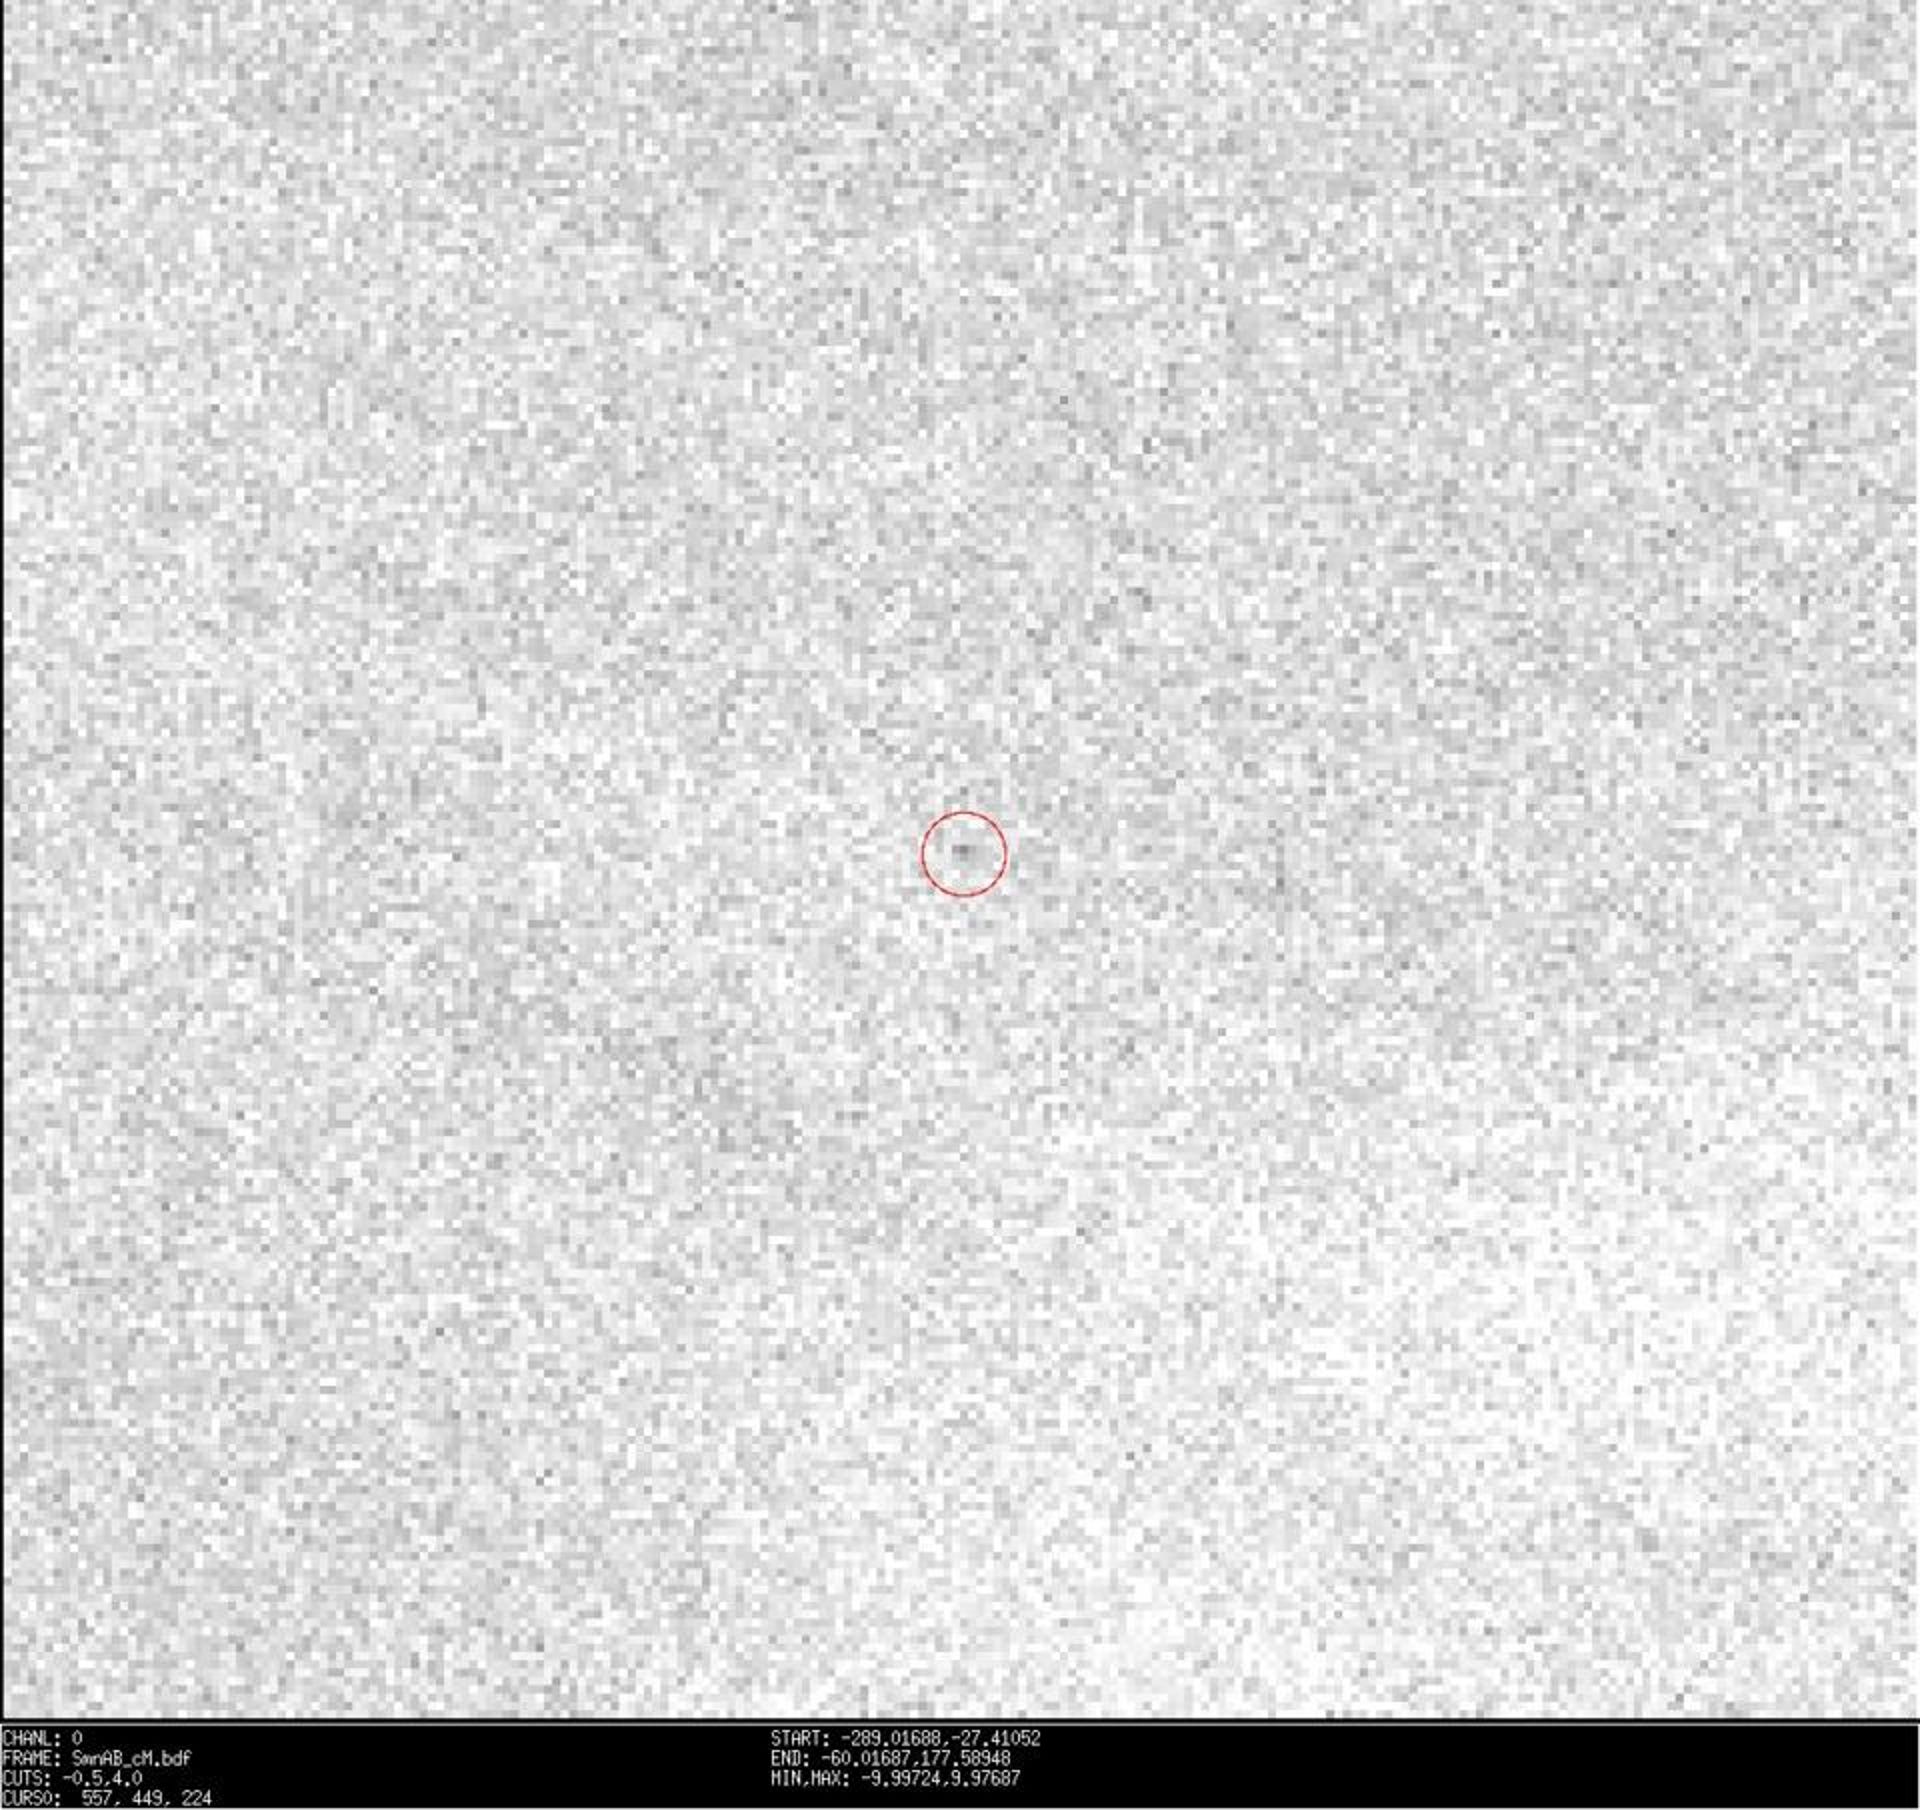 Asteroid 2021 QM1 is circled in red against a blurry pixelated gray backdrop.